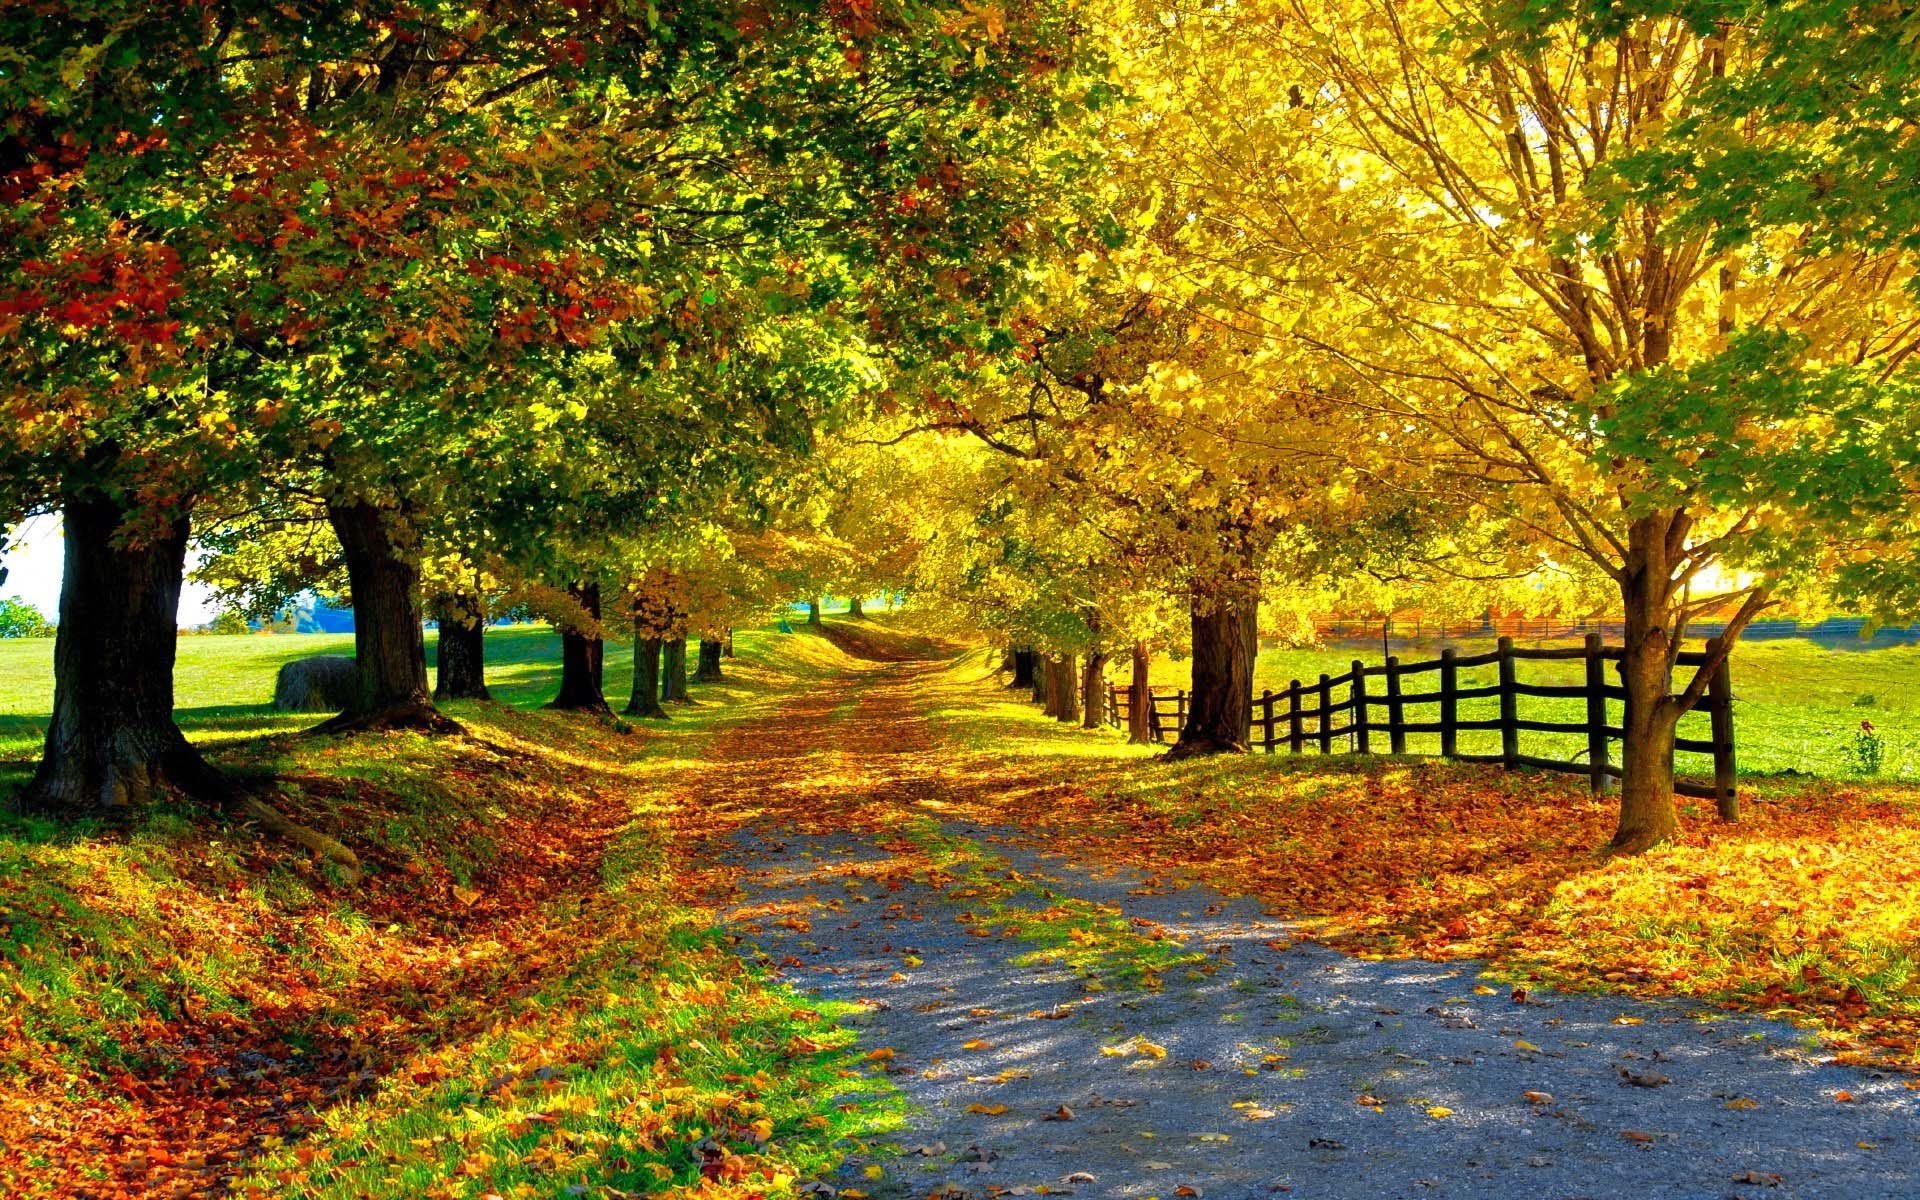 Color Of Autumn Country Road Fallen Autumn Leaves Trees With Yellow Green And Red Lily Denver Colorado HD Wallpaper 1920x1200, Wallpaper13.com